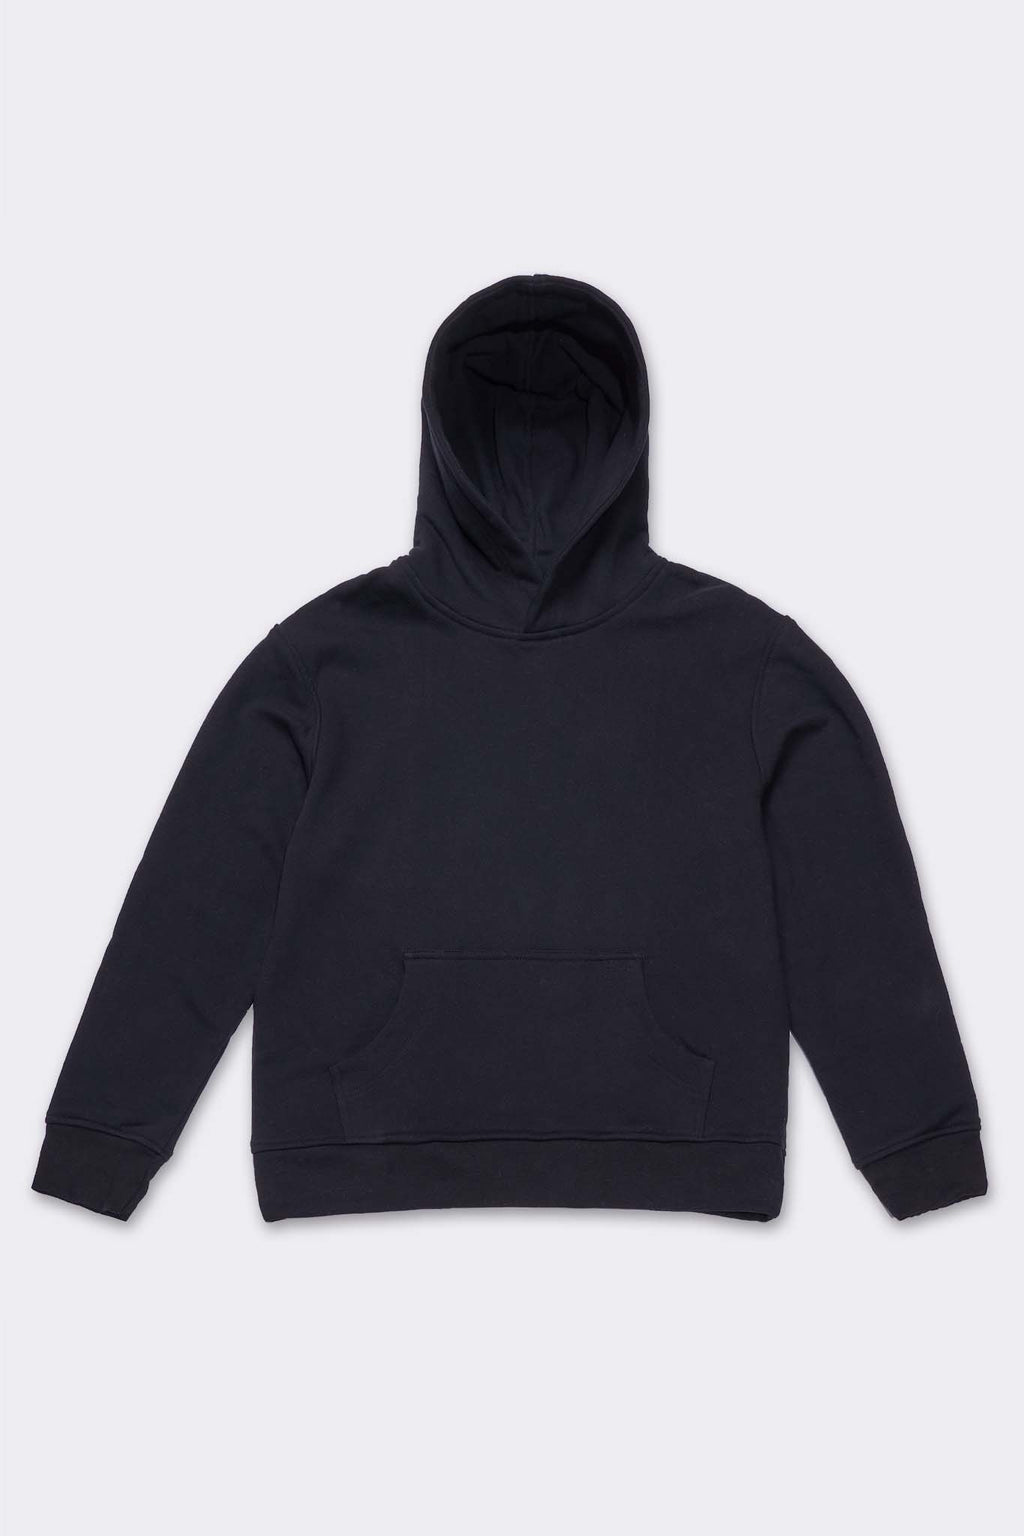 100% Organic Cotton Hoodie Sweatshirt Made in the USA — Harvest & Mill, organic cotton clothing, grown & sewn in USA